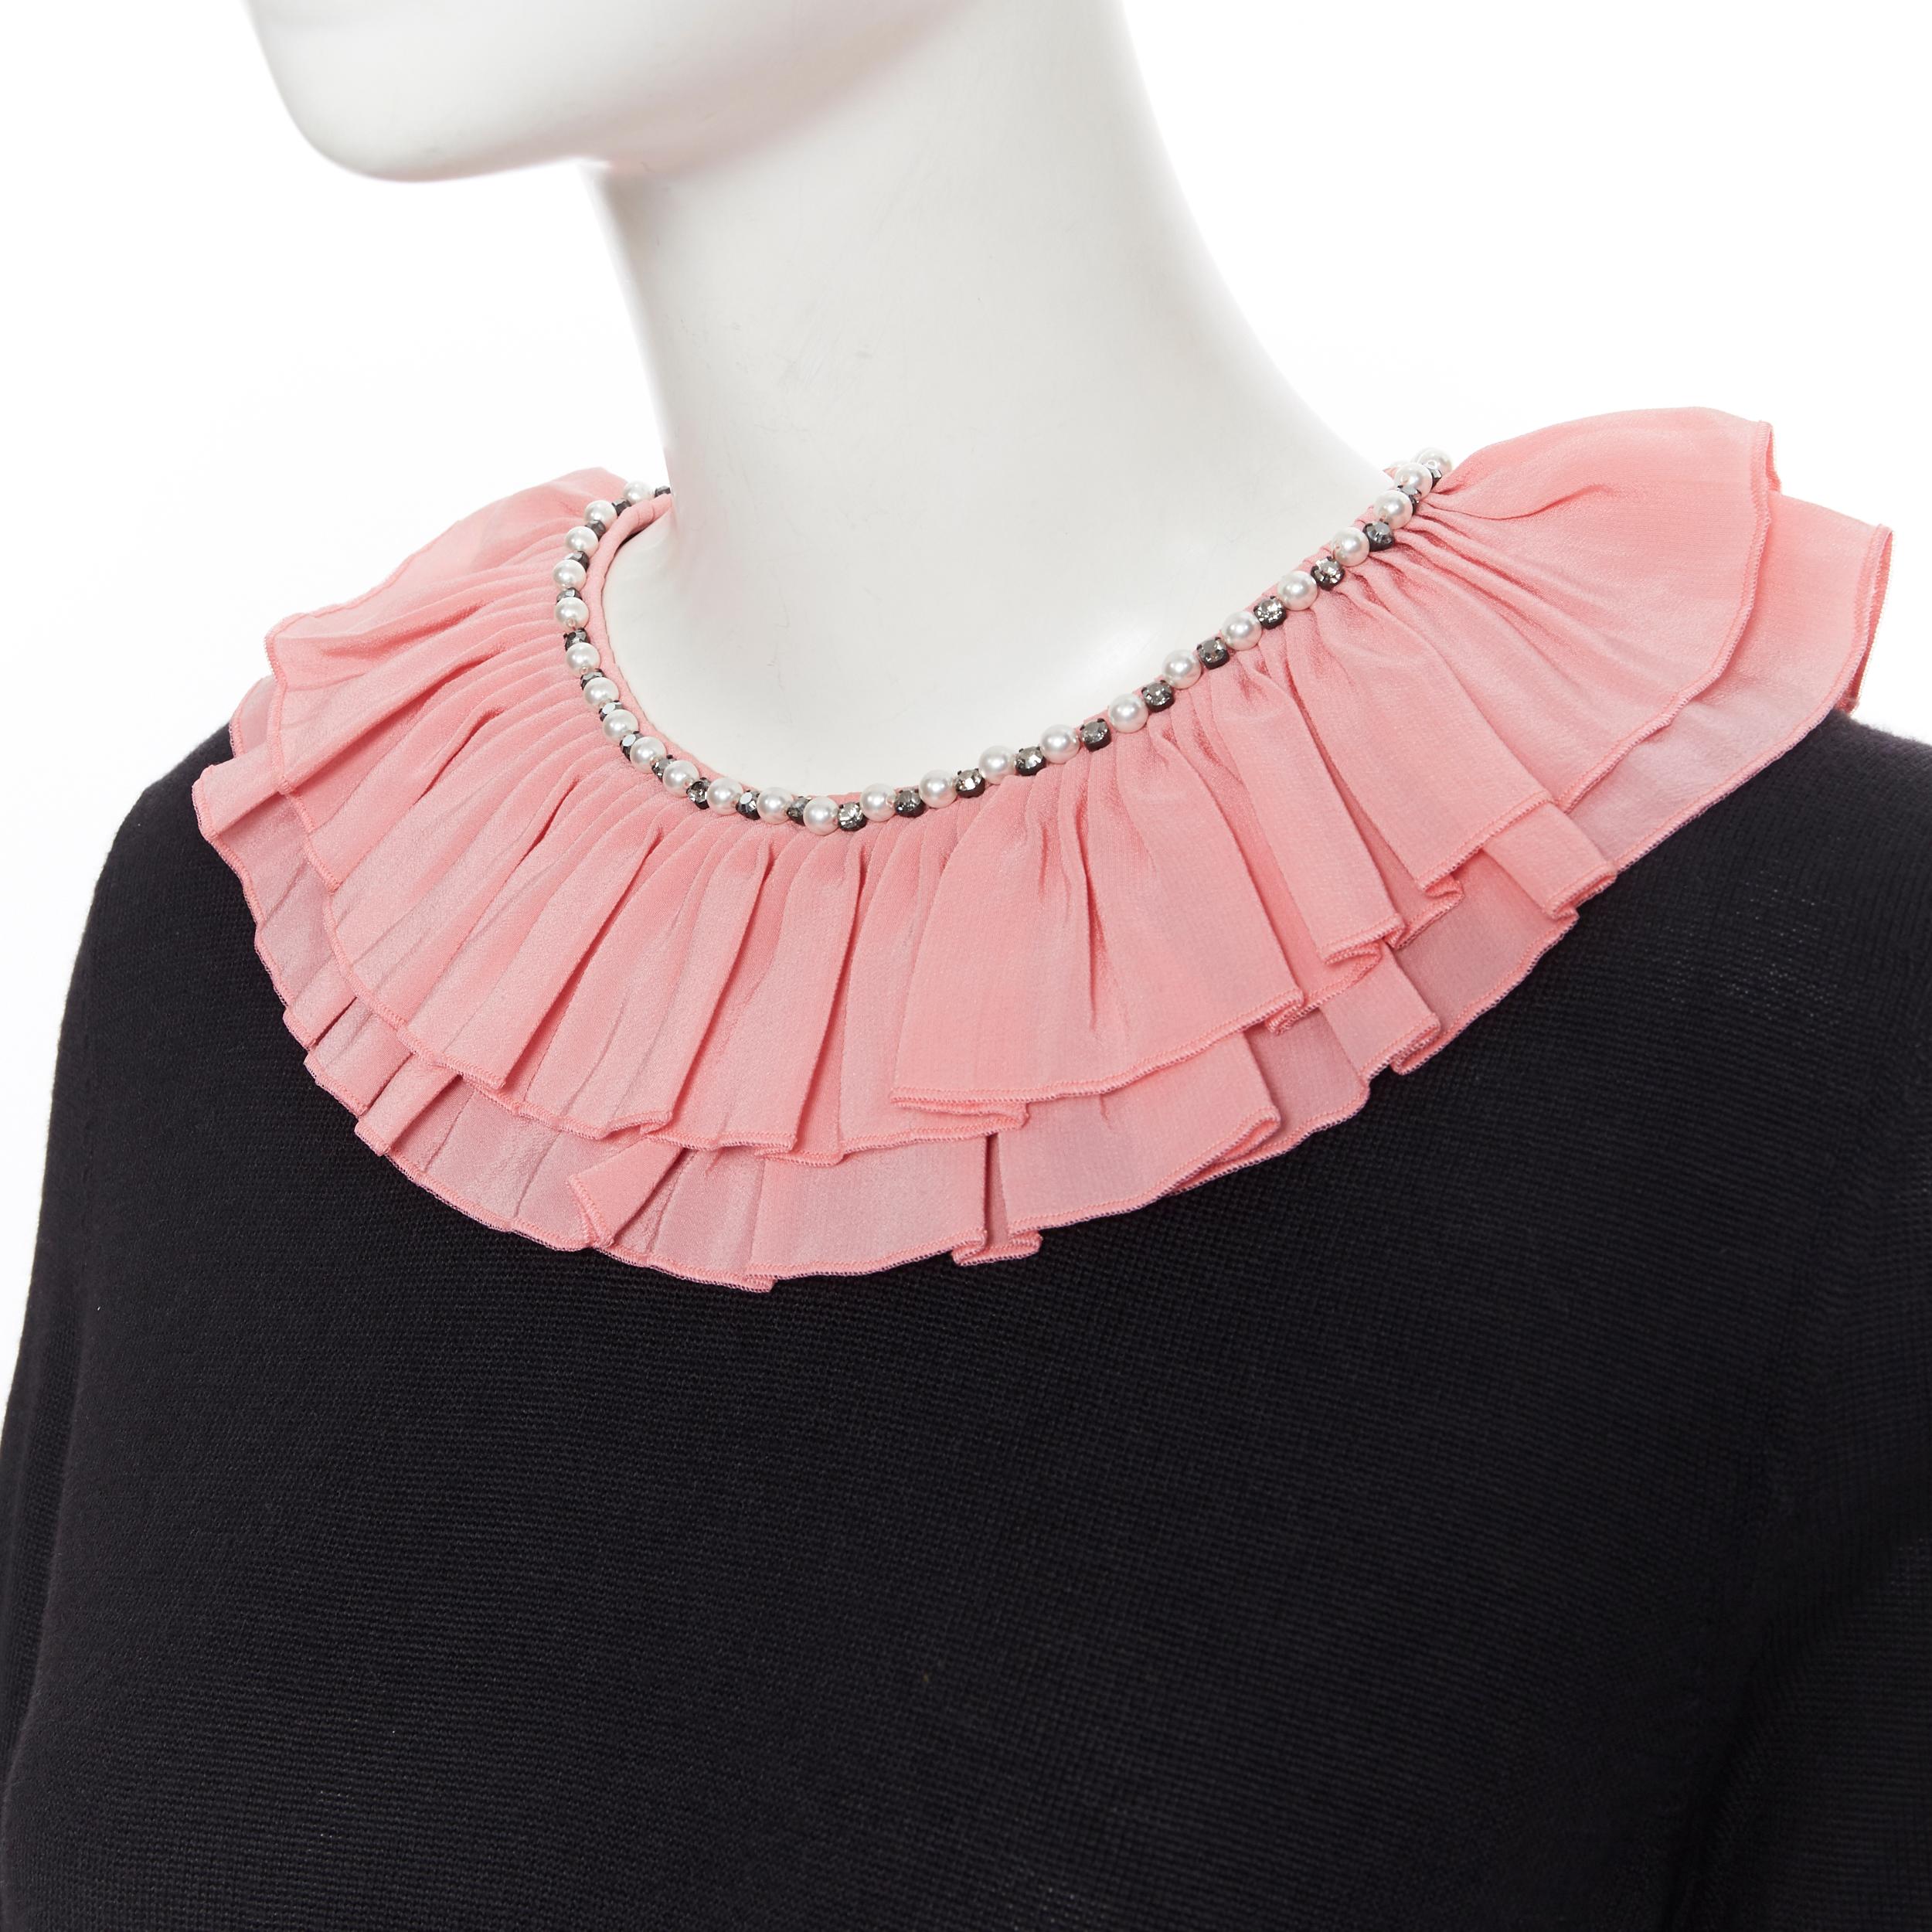 GUCCI MICHELE black silk cashmere wool pink ruffle pearl crystal sweater M
Brand: Gucci
Designer: Alessandro Michele
Model Name / Style: Cashmere blend sweater
Material: Cashmere, silk, wool
Color: Black, pink
Pattern: Solid
Closure: Zip
Extra